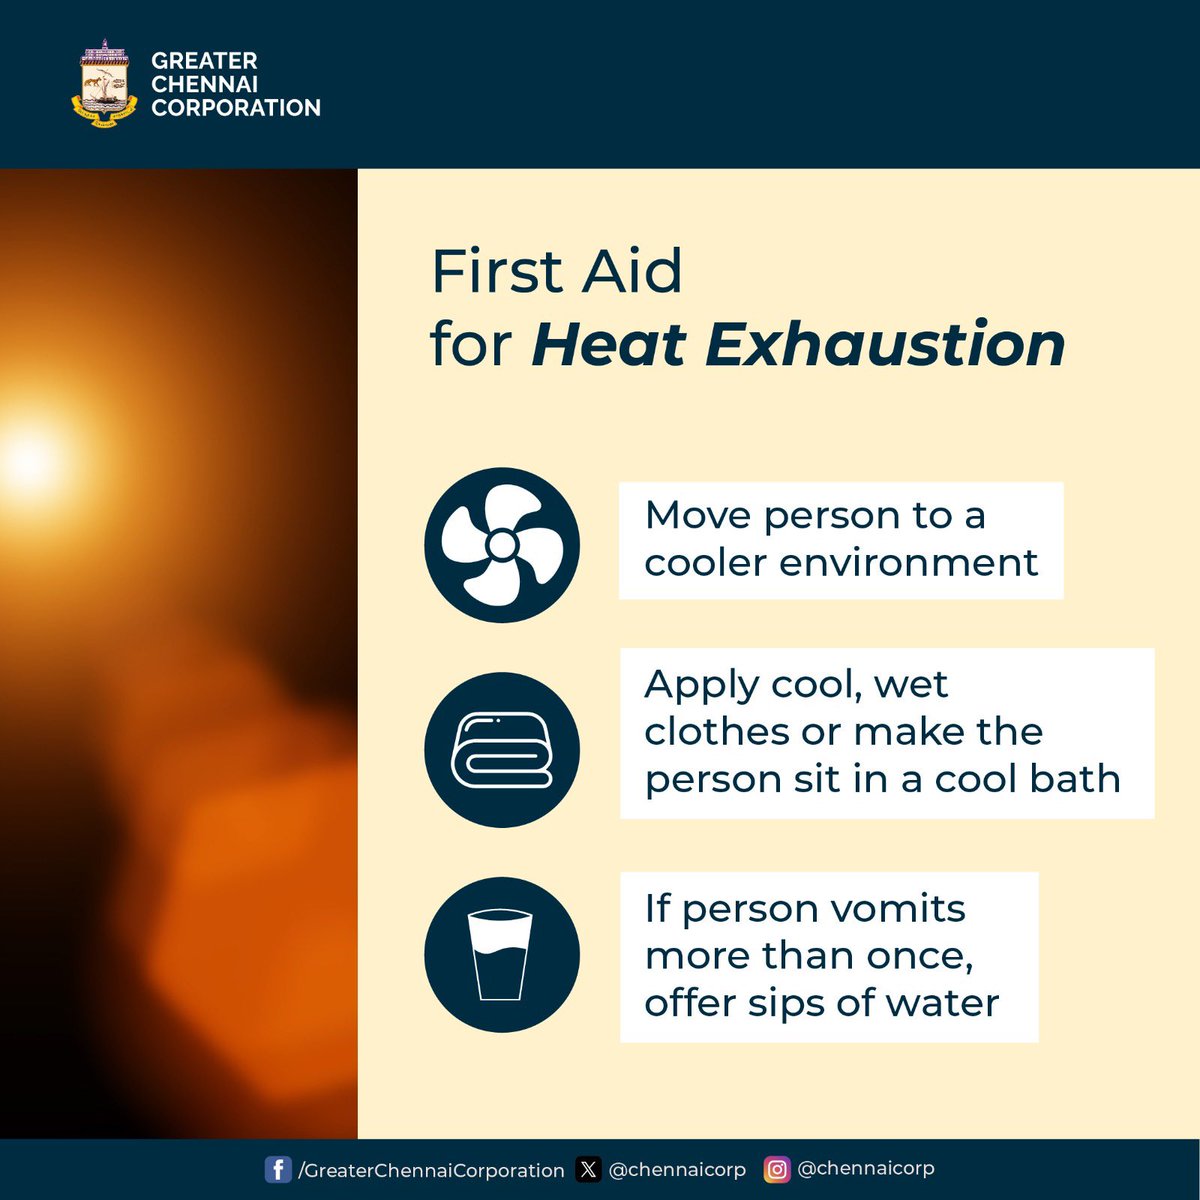 Dear #Chennaiites,
In case you're feeling the effects of heat exhaustion, find a cool, shaded spot immediately, wear damp clothing or take a cool shower. Remember to drink water gradually, and seek medical help if vomiting happens more than once.
#ChennaiCorporation 
#HeretoServe